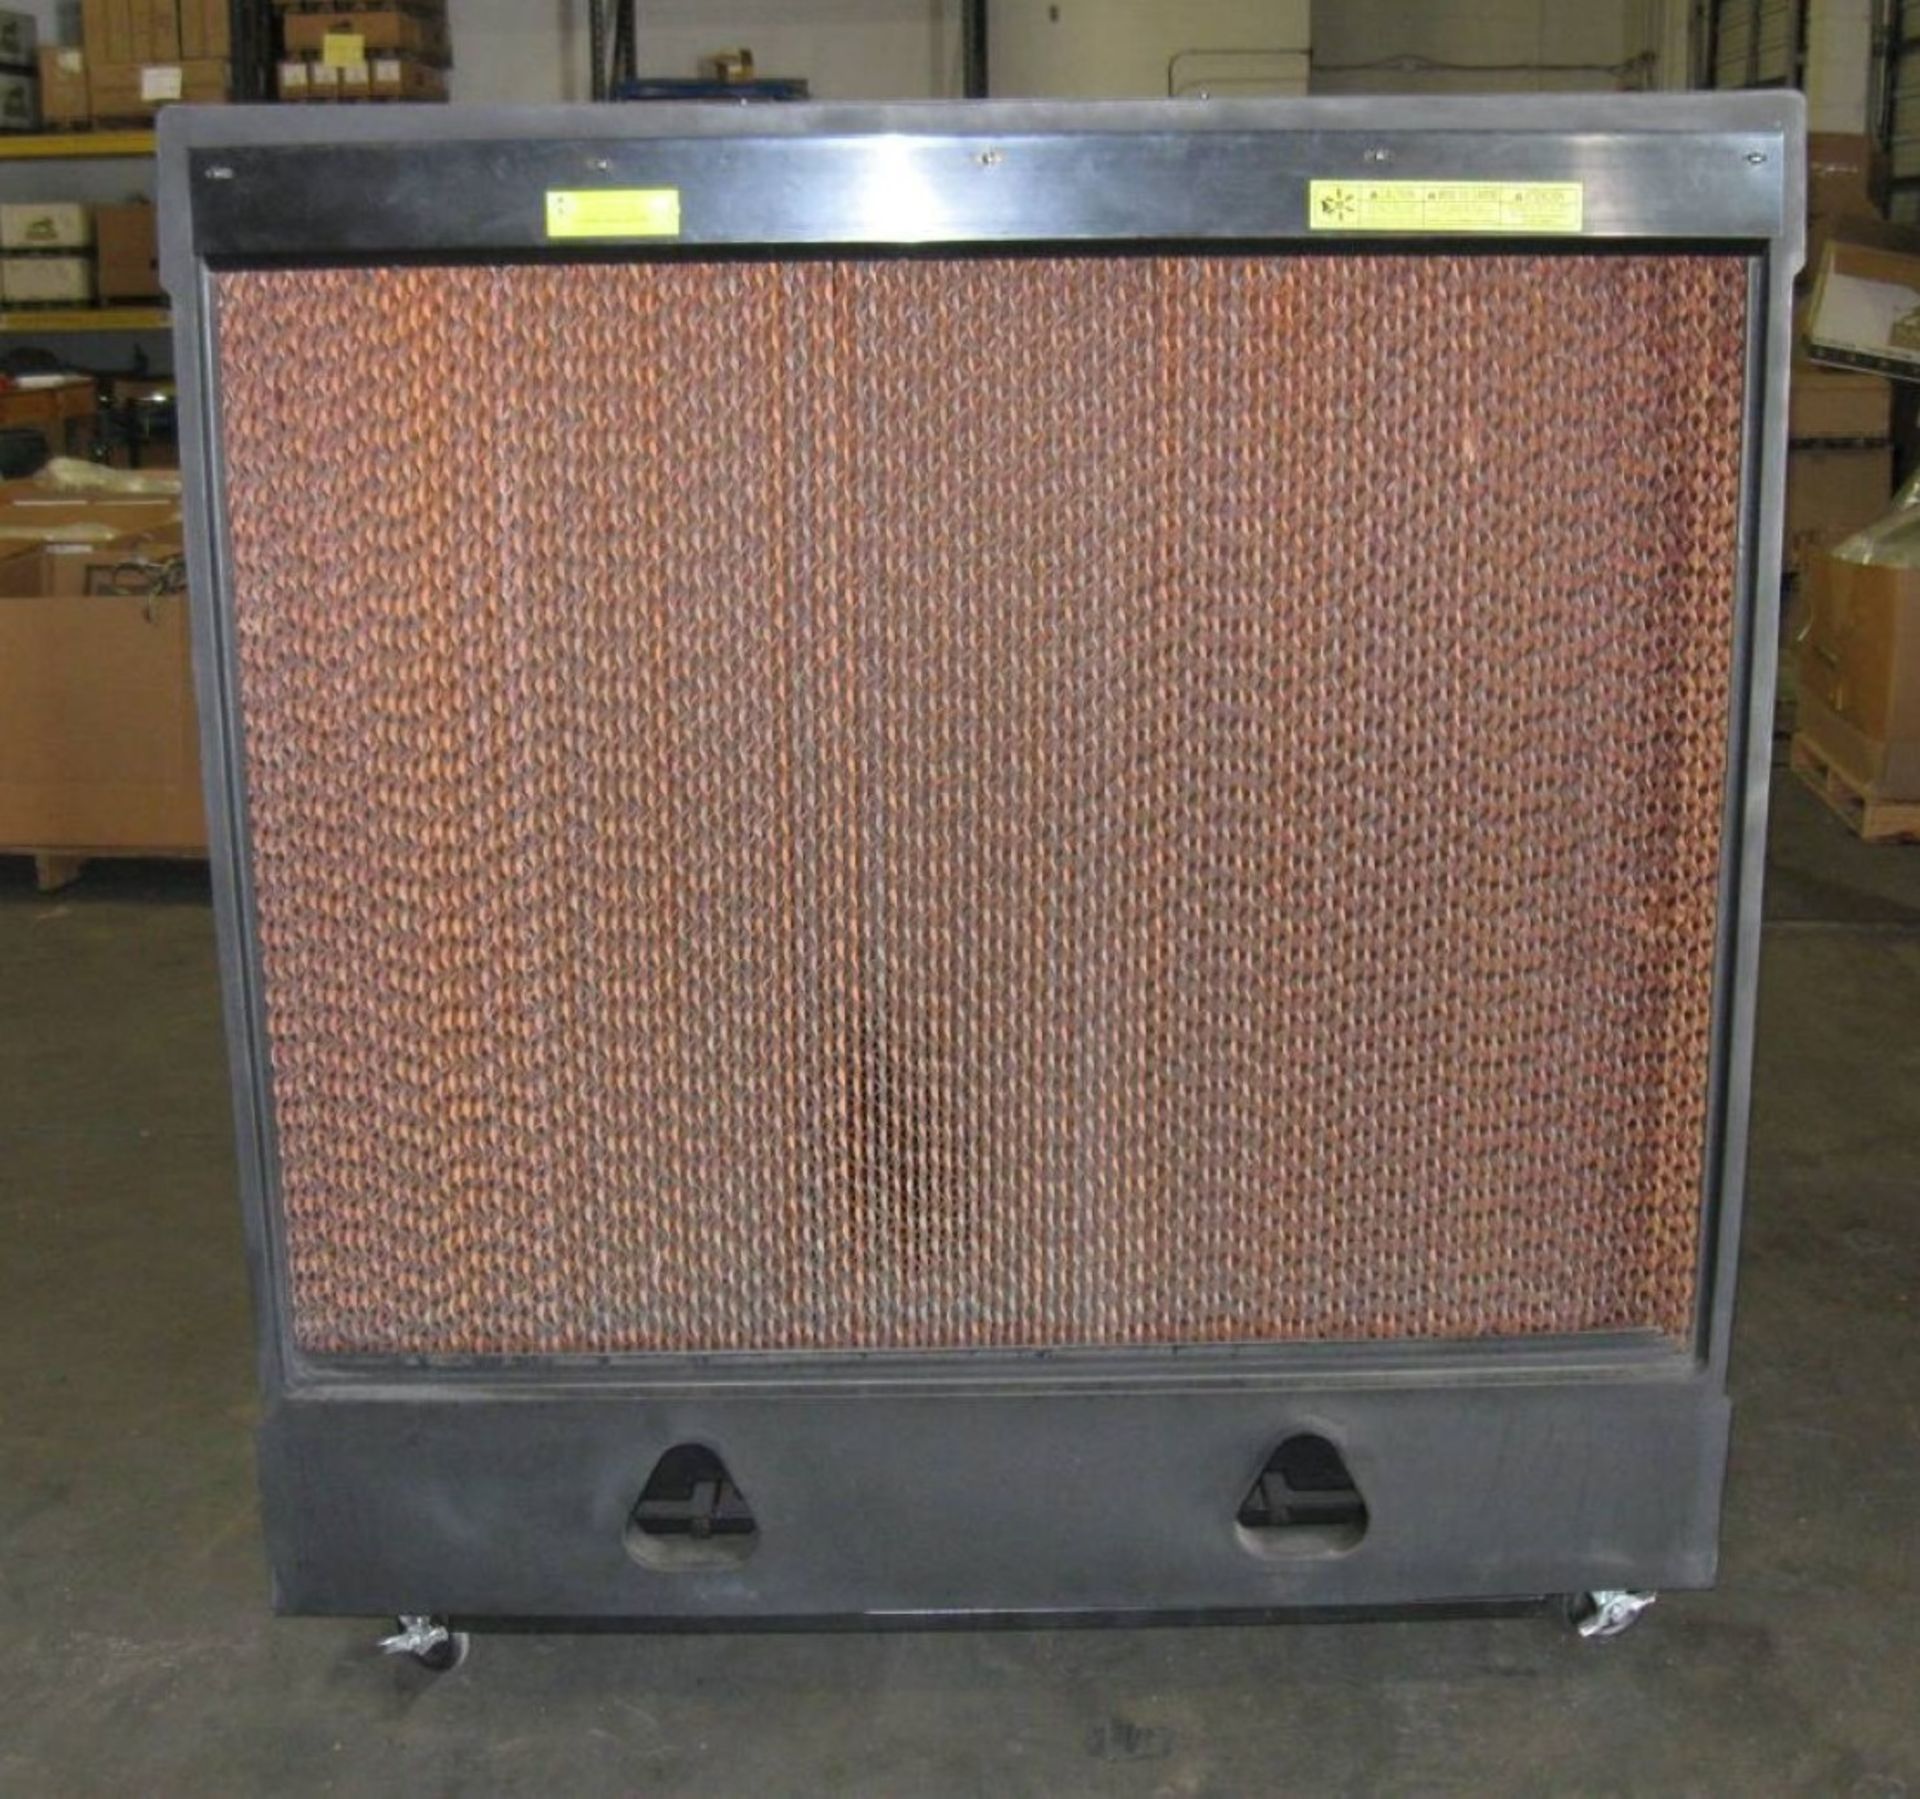 2500 SQFT CAPACITY 36" PORTABLE EVAPORATIVE AIR COOLER (NEW IN A BOX) - Image 4 of 6